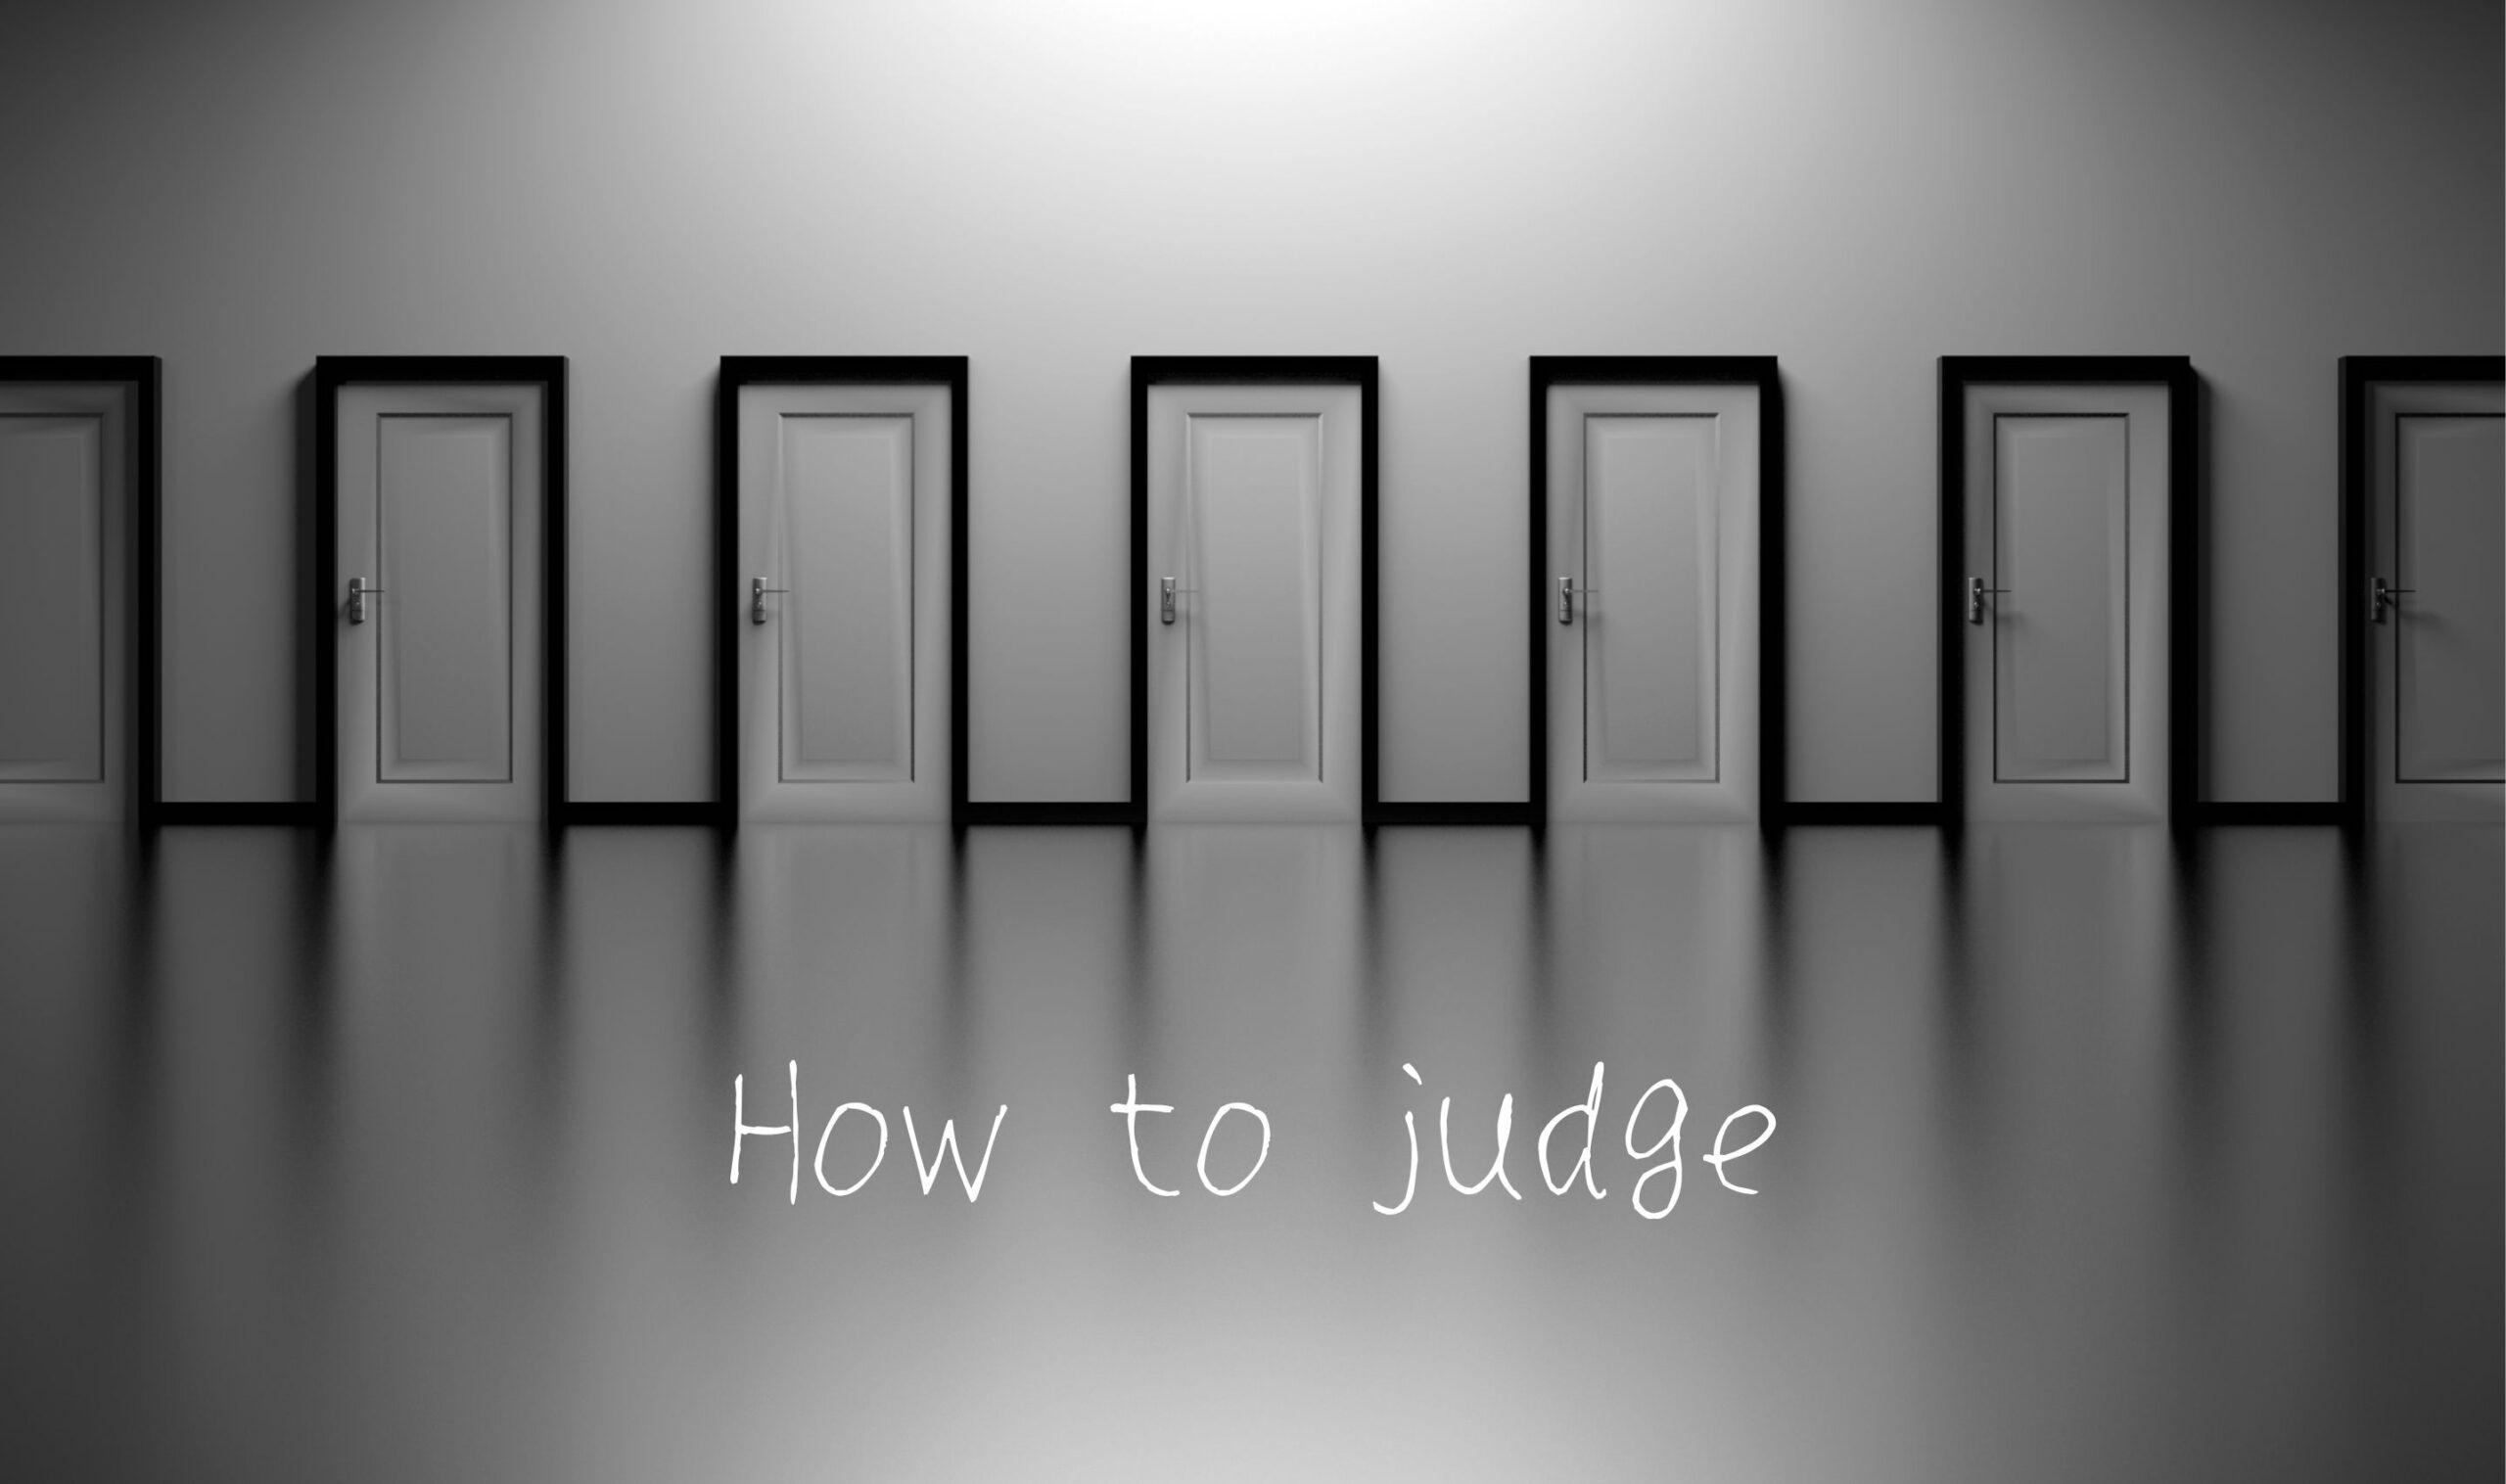 How to judge